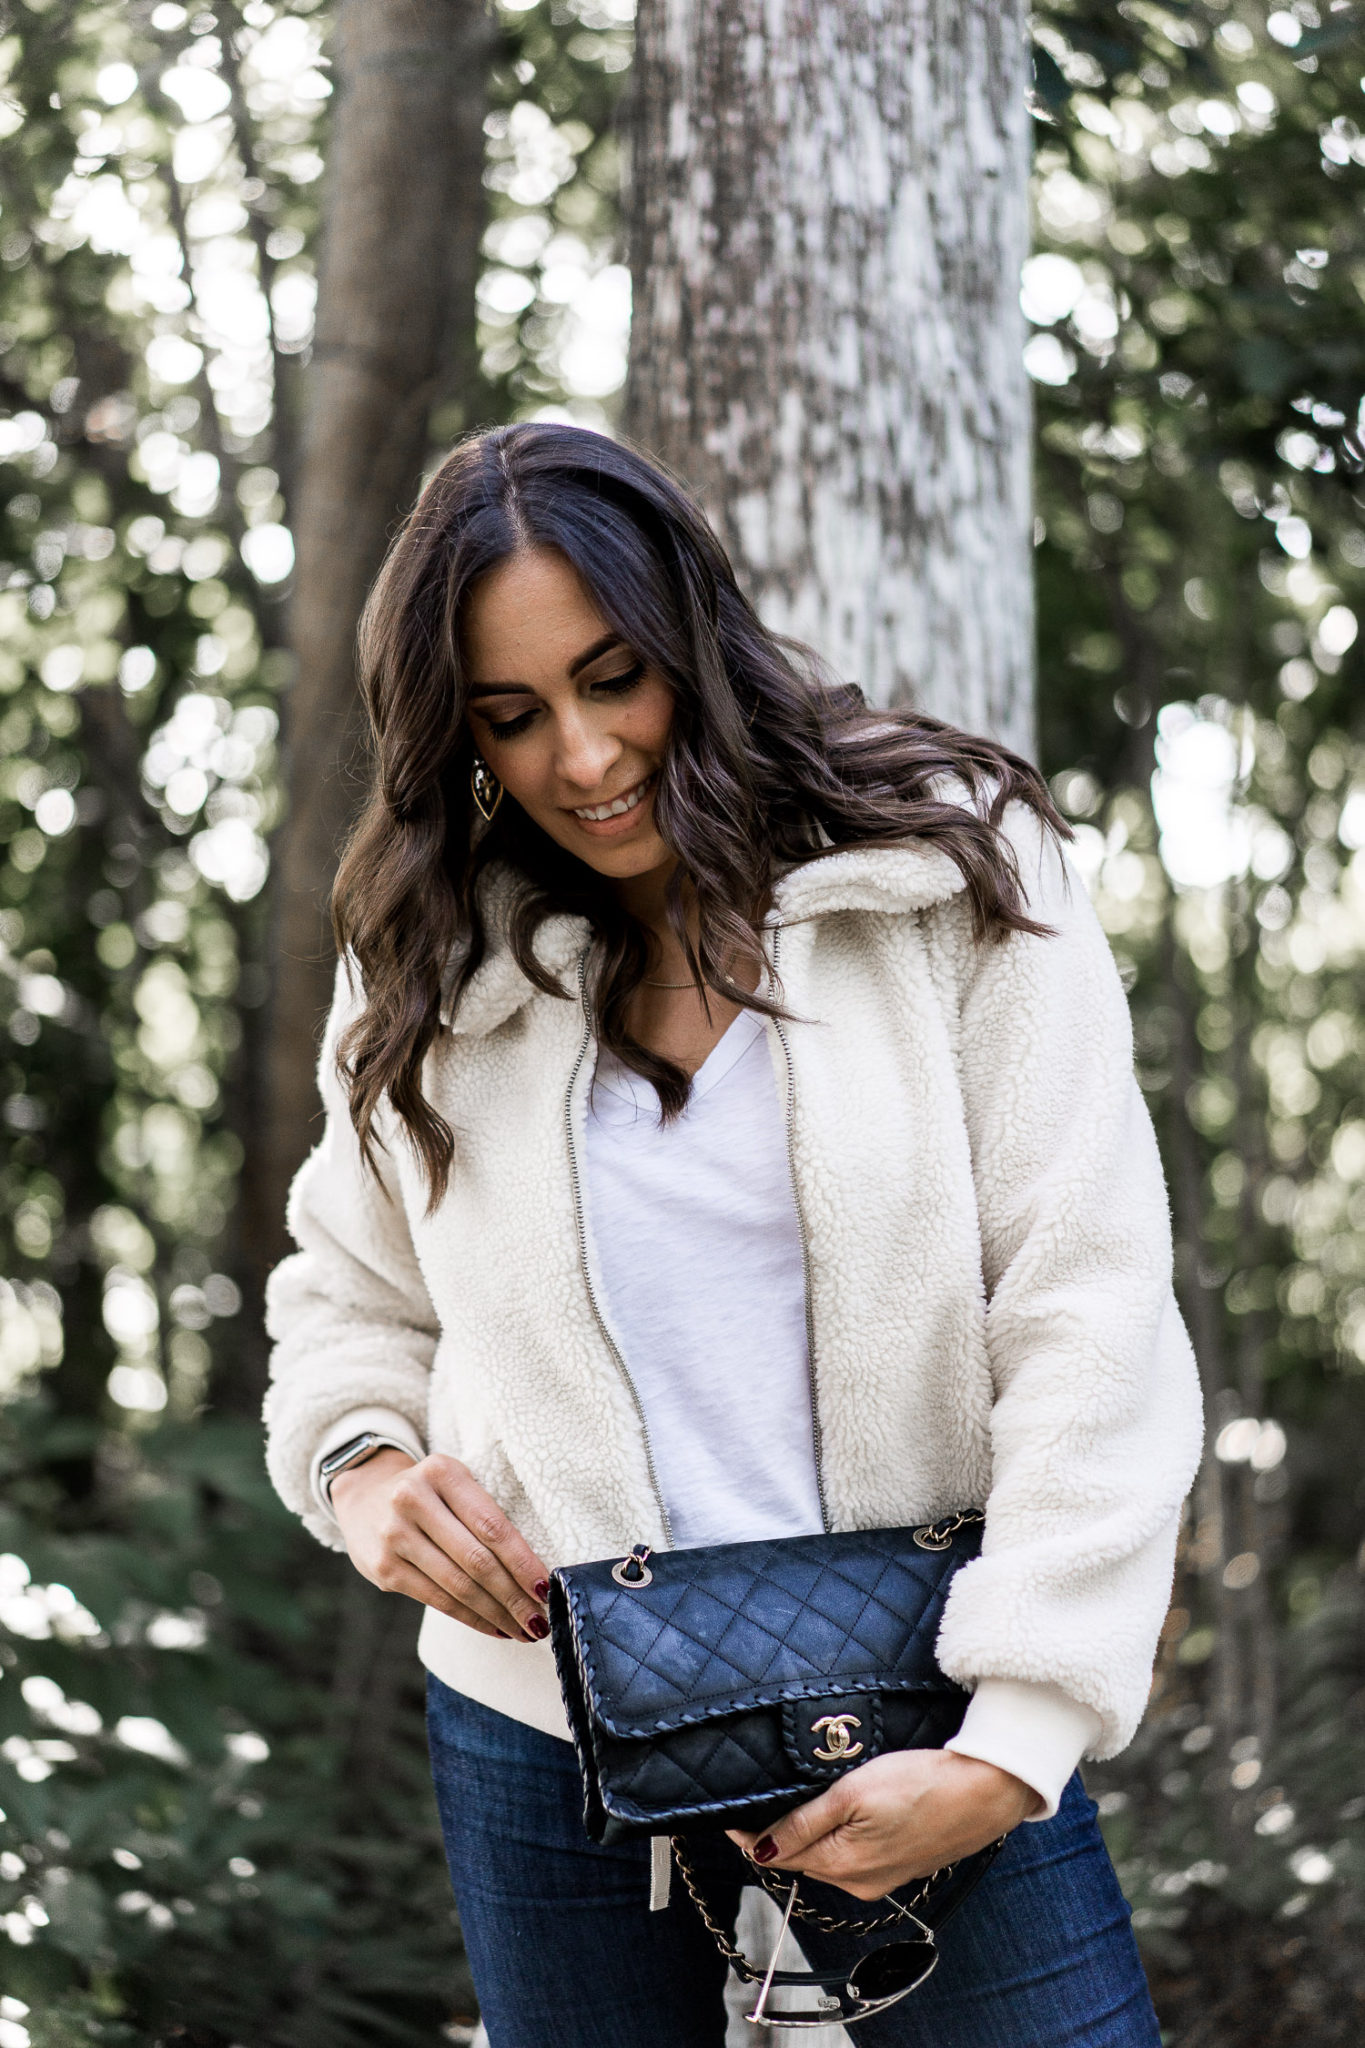 Shearling jacket outfit